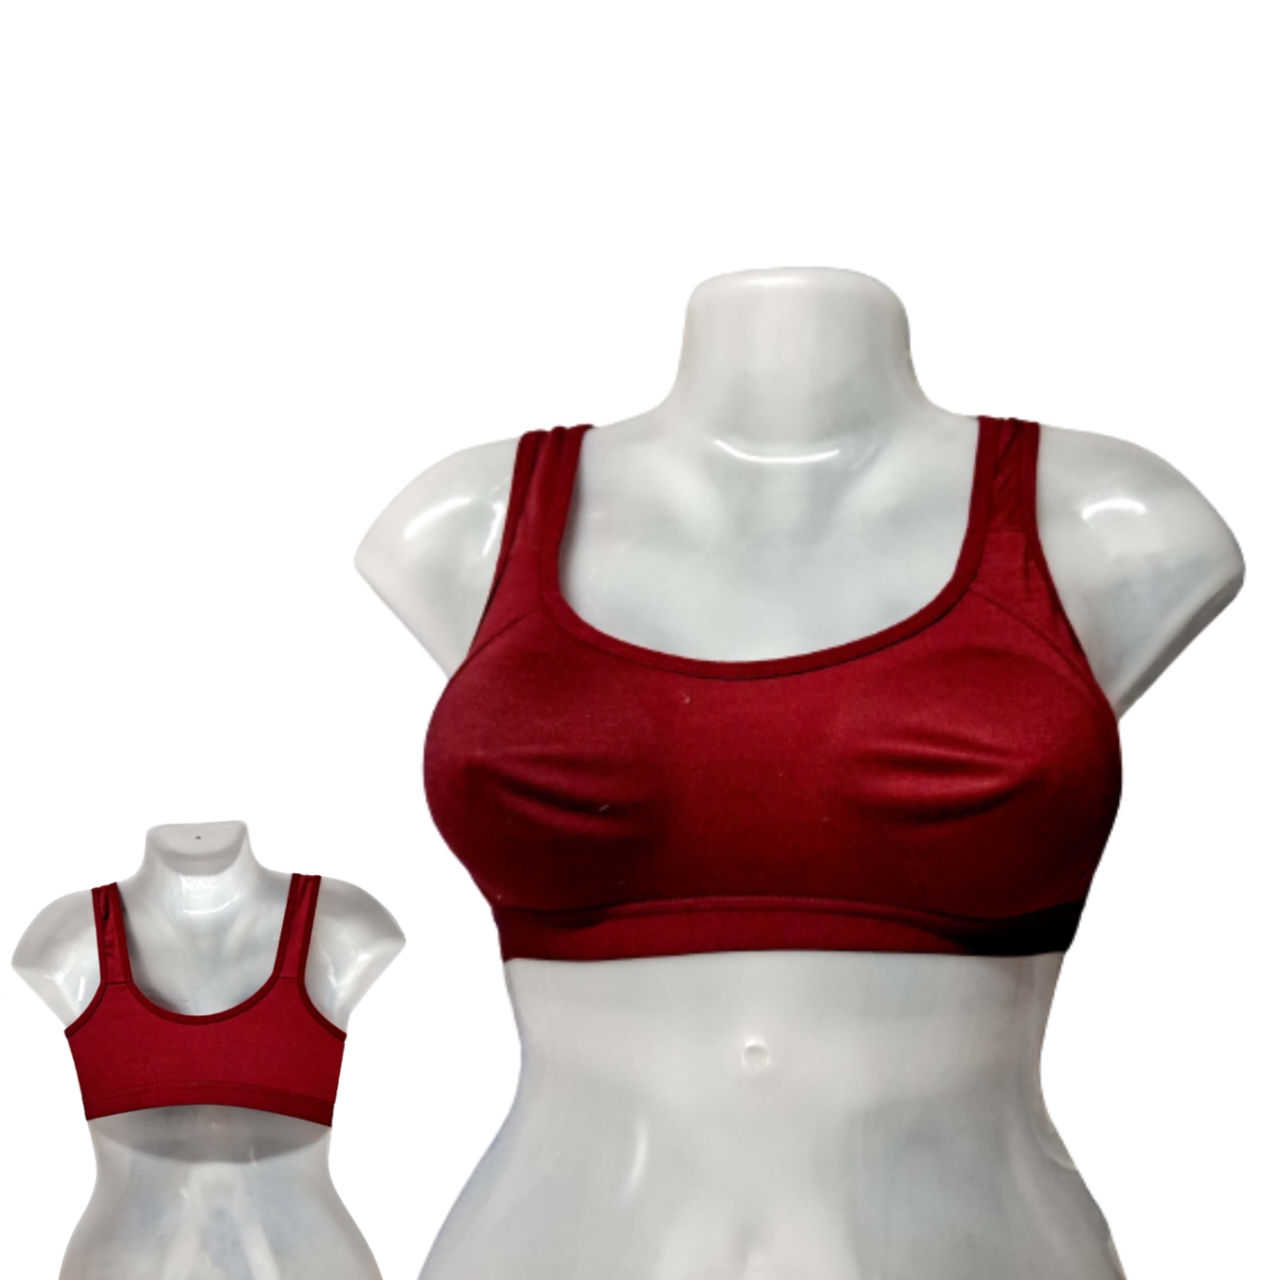 Shapyfy Super Comfy Sports Bra | Without Pad | Skin Friendly Elastics | Maroon Color